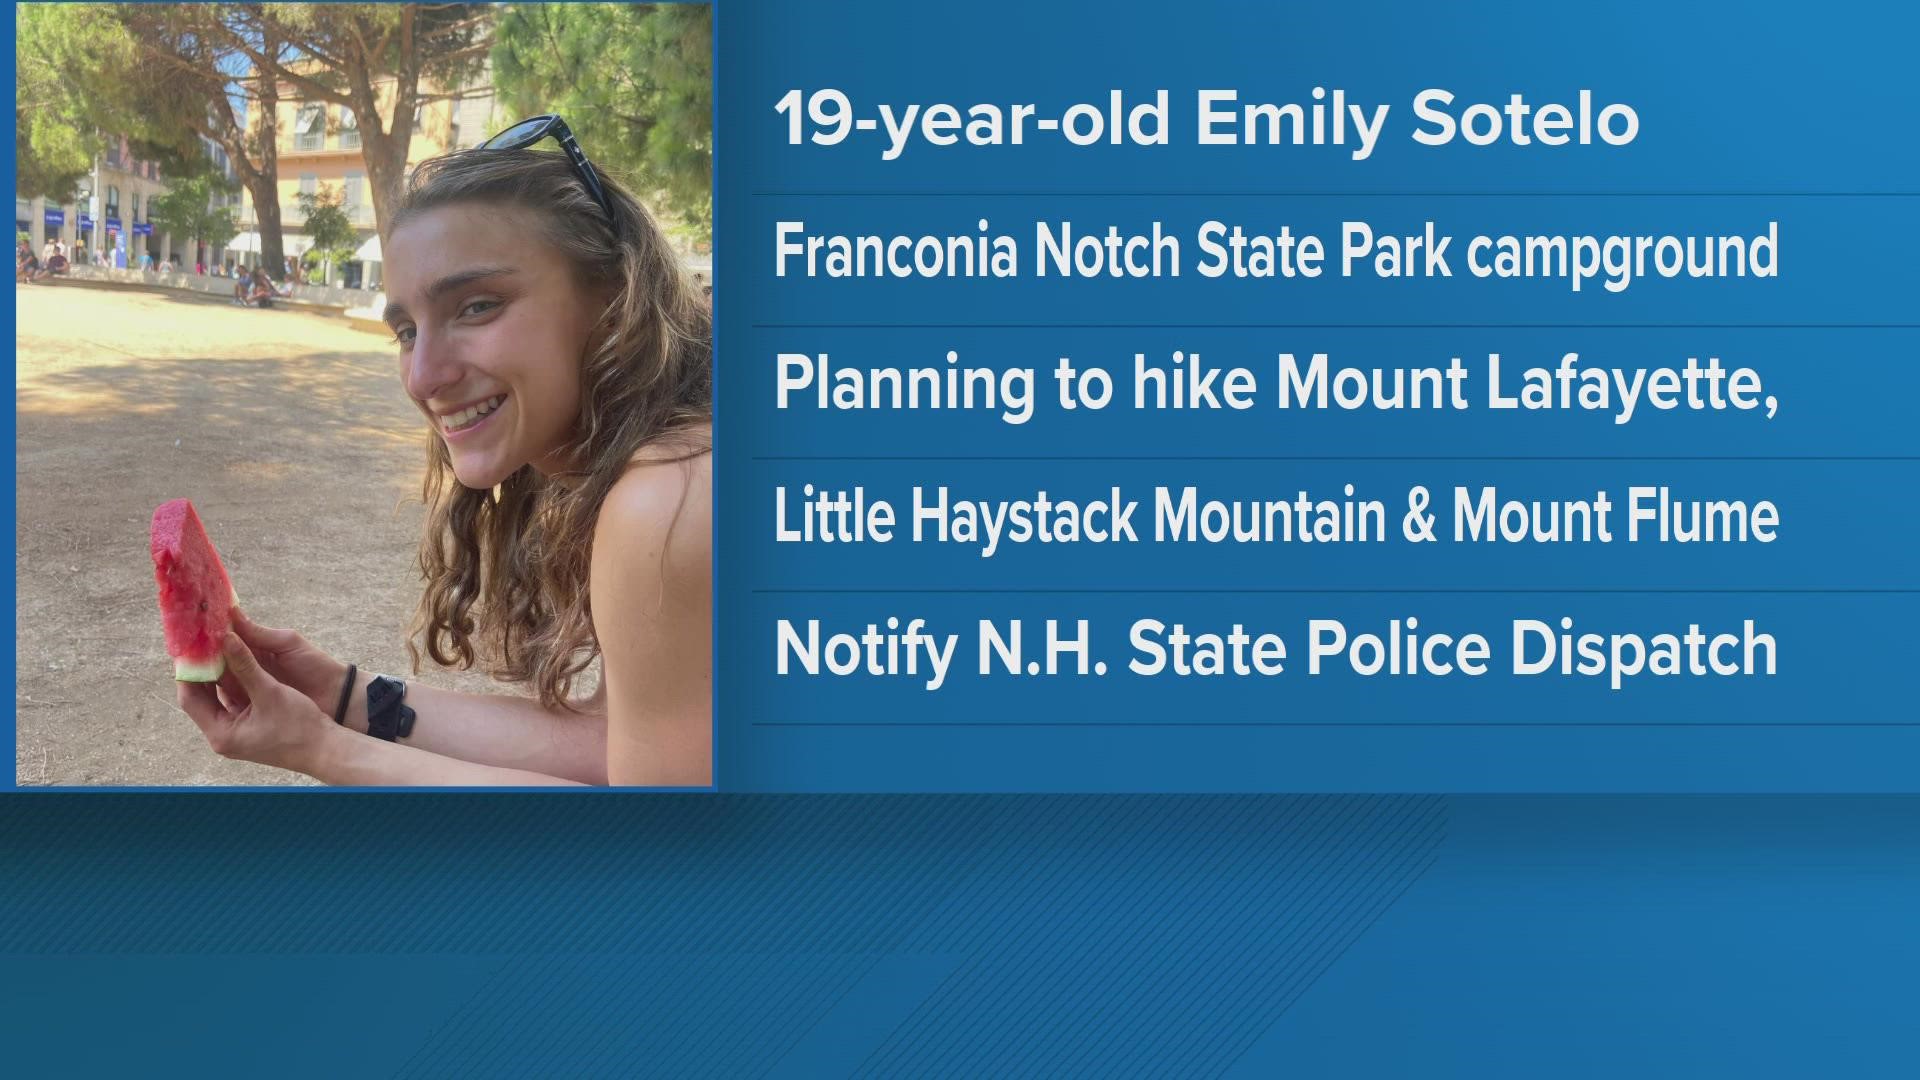 Her hiking route included Mount Lafayette, Haystack, and Flume.